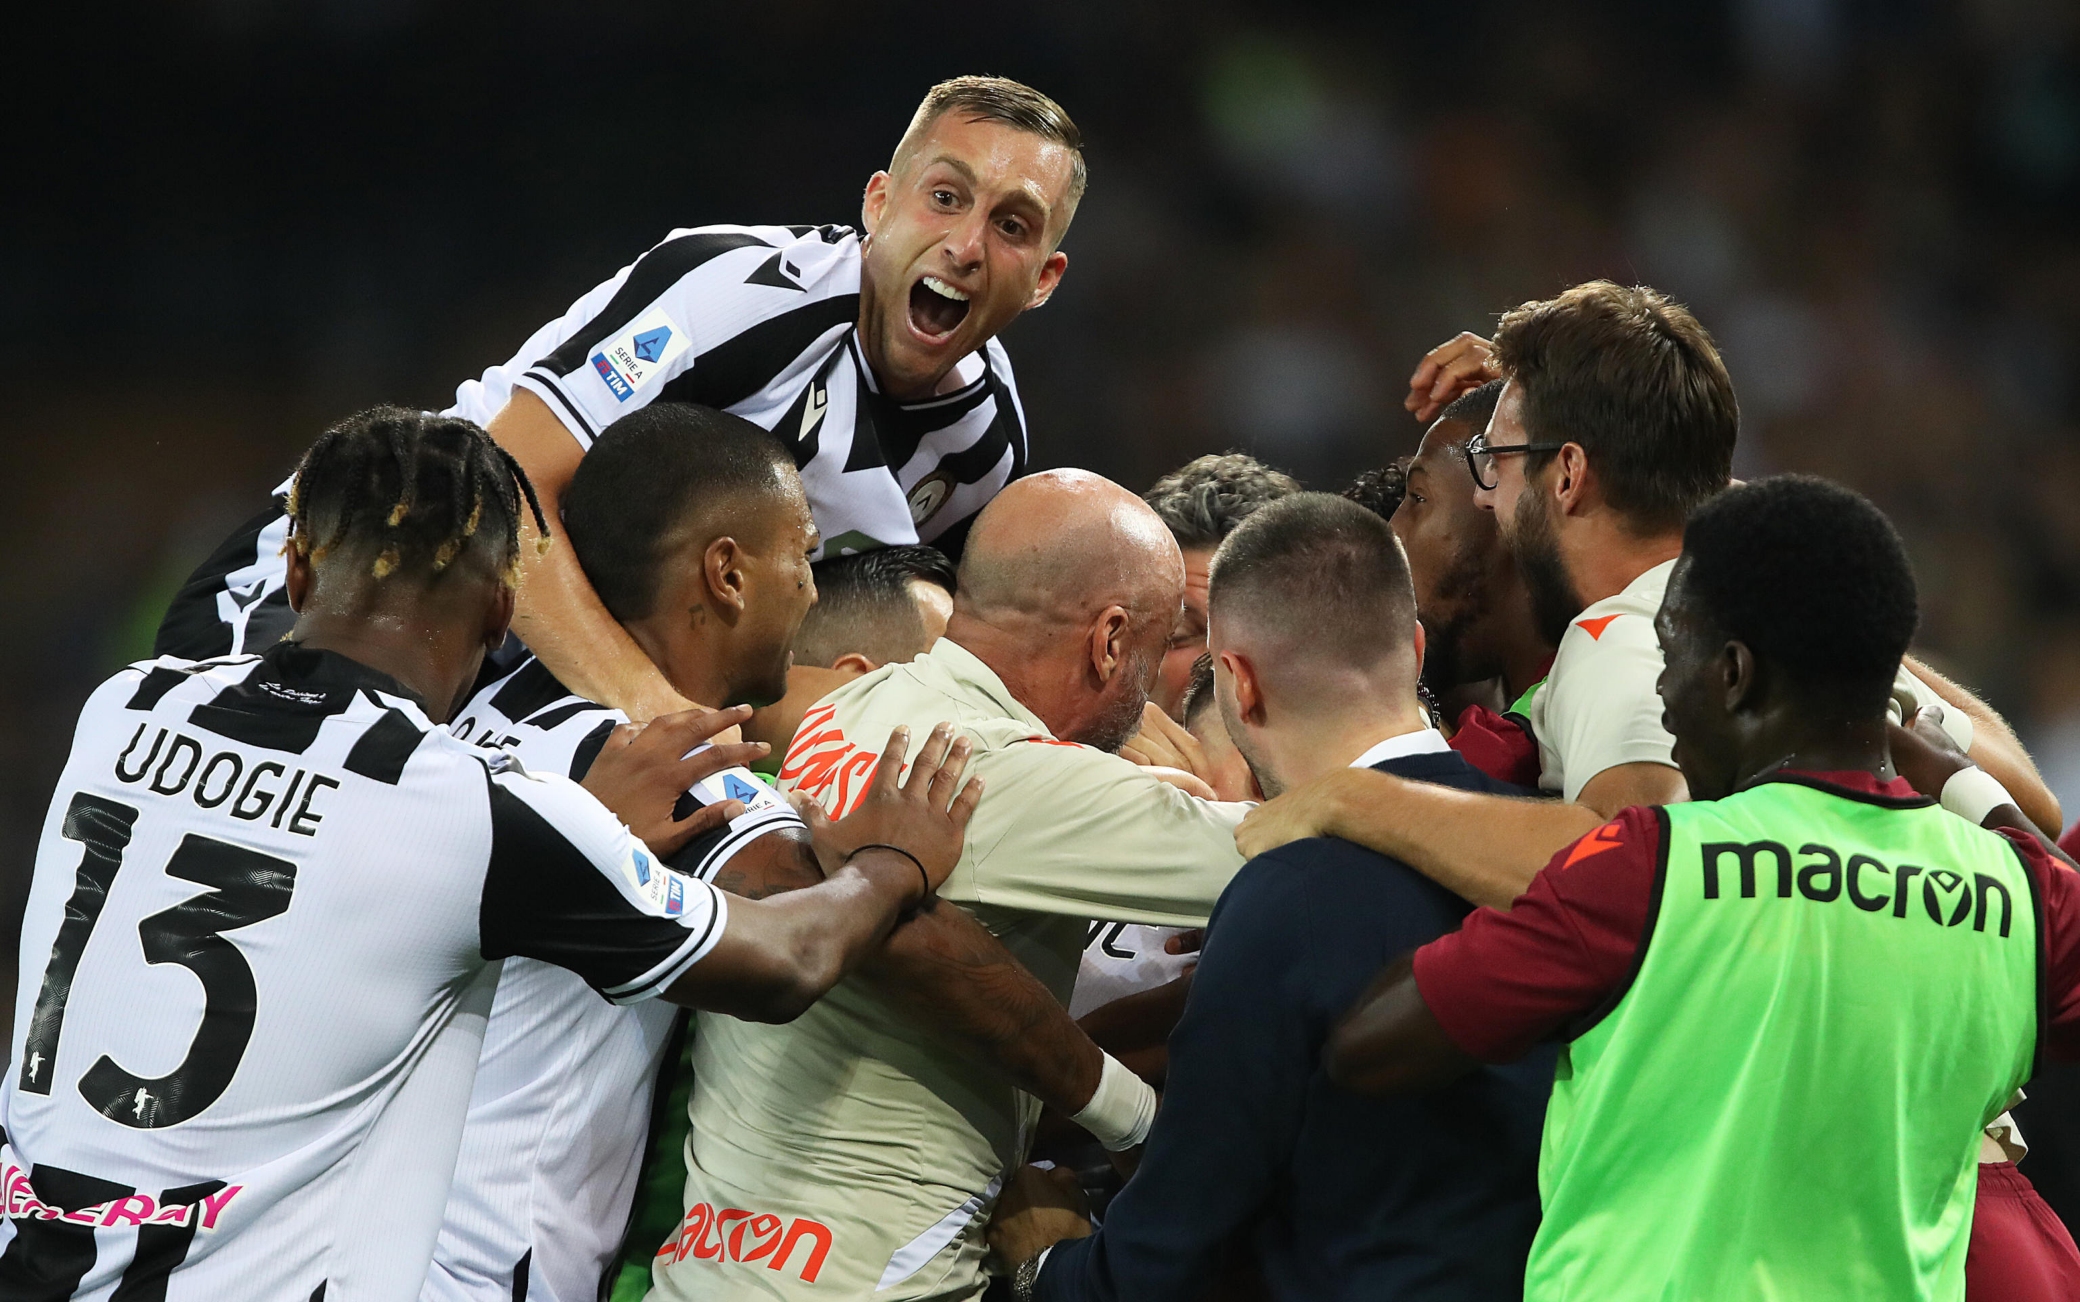 Shocker in Serie A! Udinese inflicted José Mourinho one of the most brutal defeats in his career as the Bianconeri dismantled Roma 4-0 at the Dacia Arena